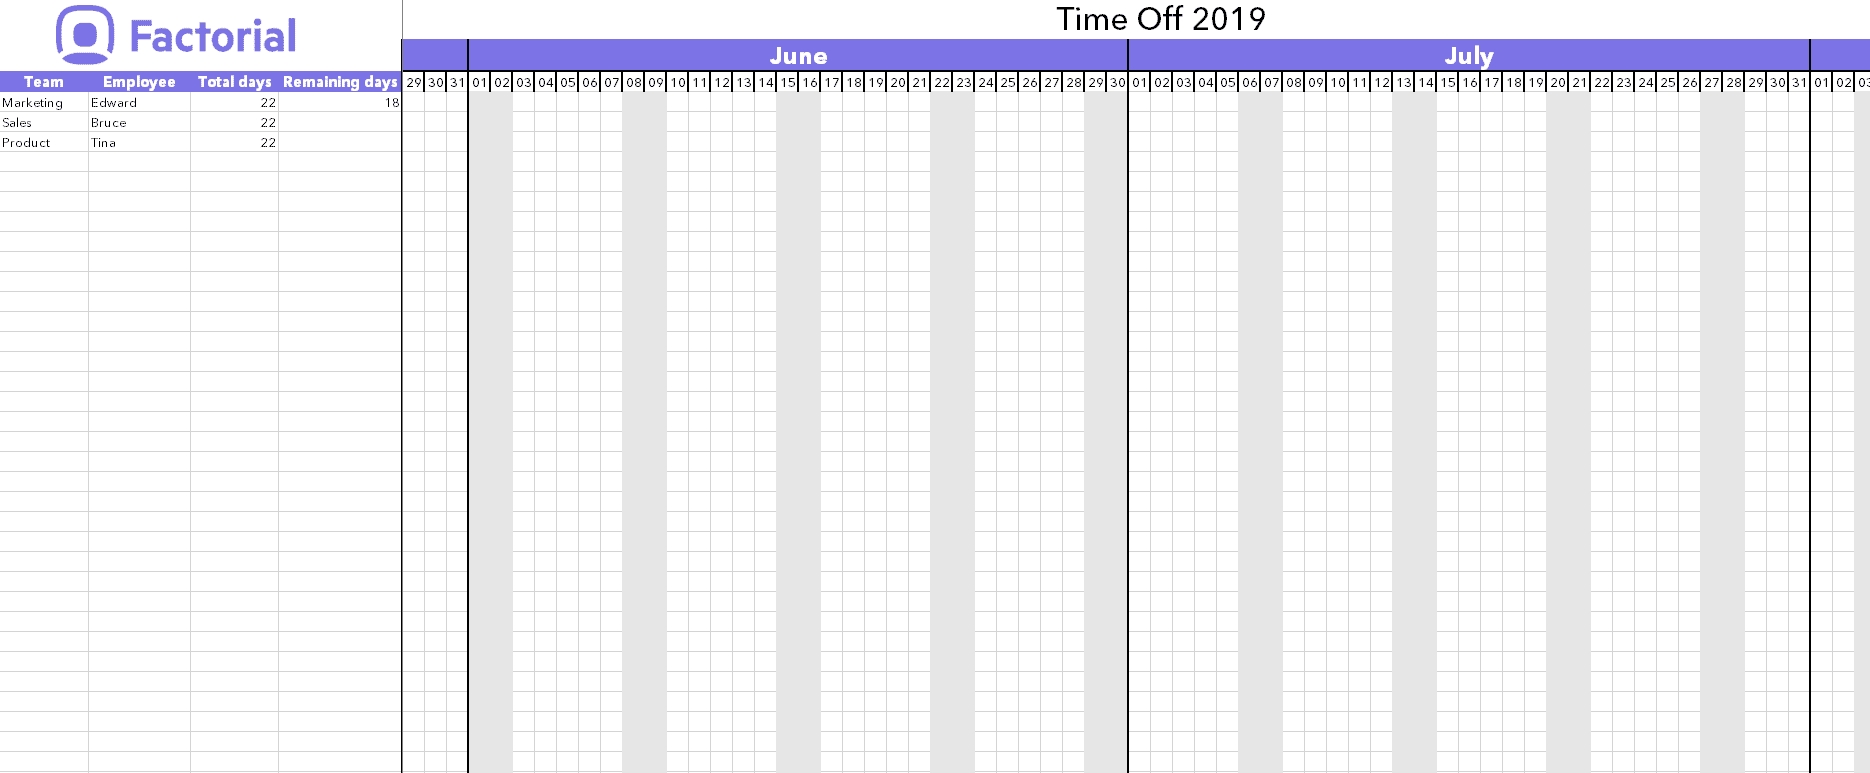 Manage Time Off Requests W/ Free Template | Factorial